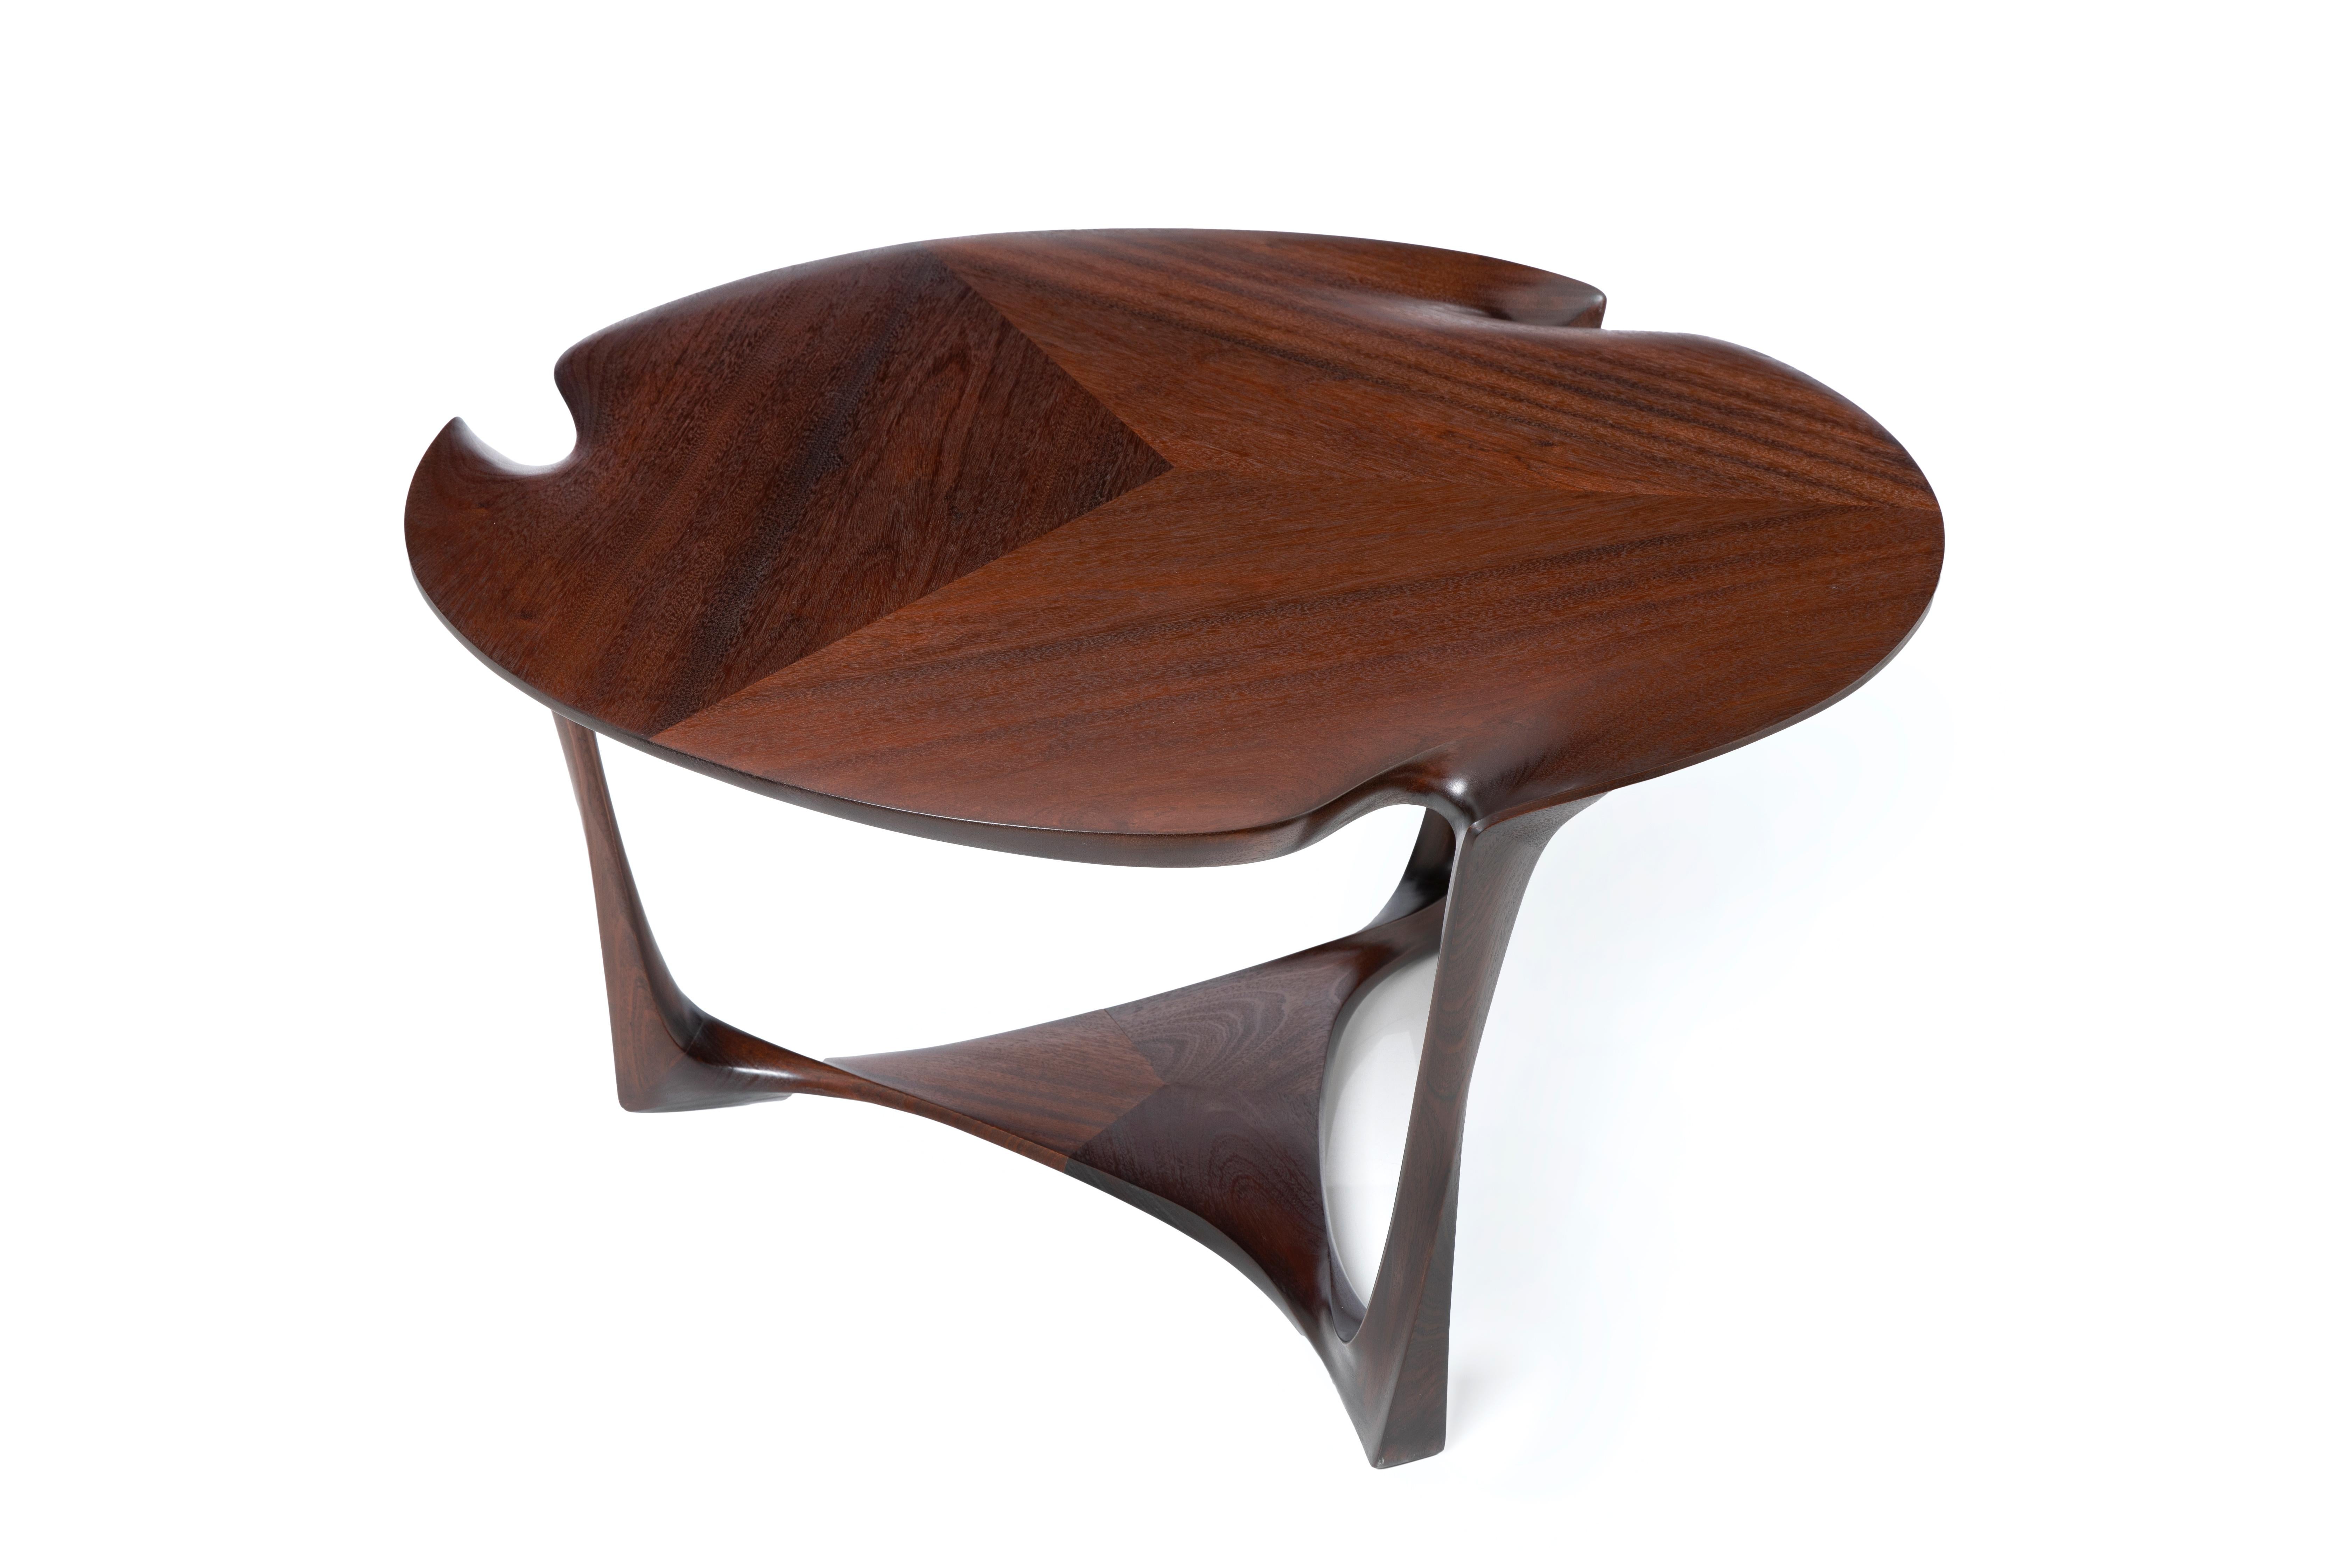 Contemporary ANTONI TABLE A Modern take on Art Nouveau. Sloping legs, Carved, Collectible. For Sale